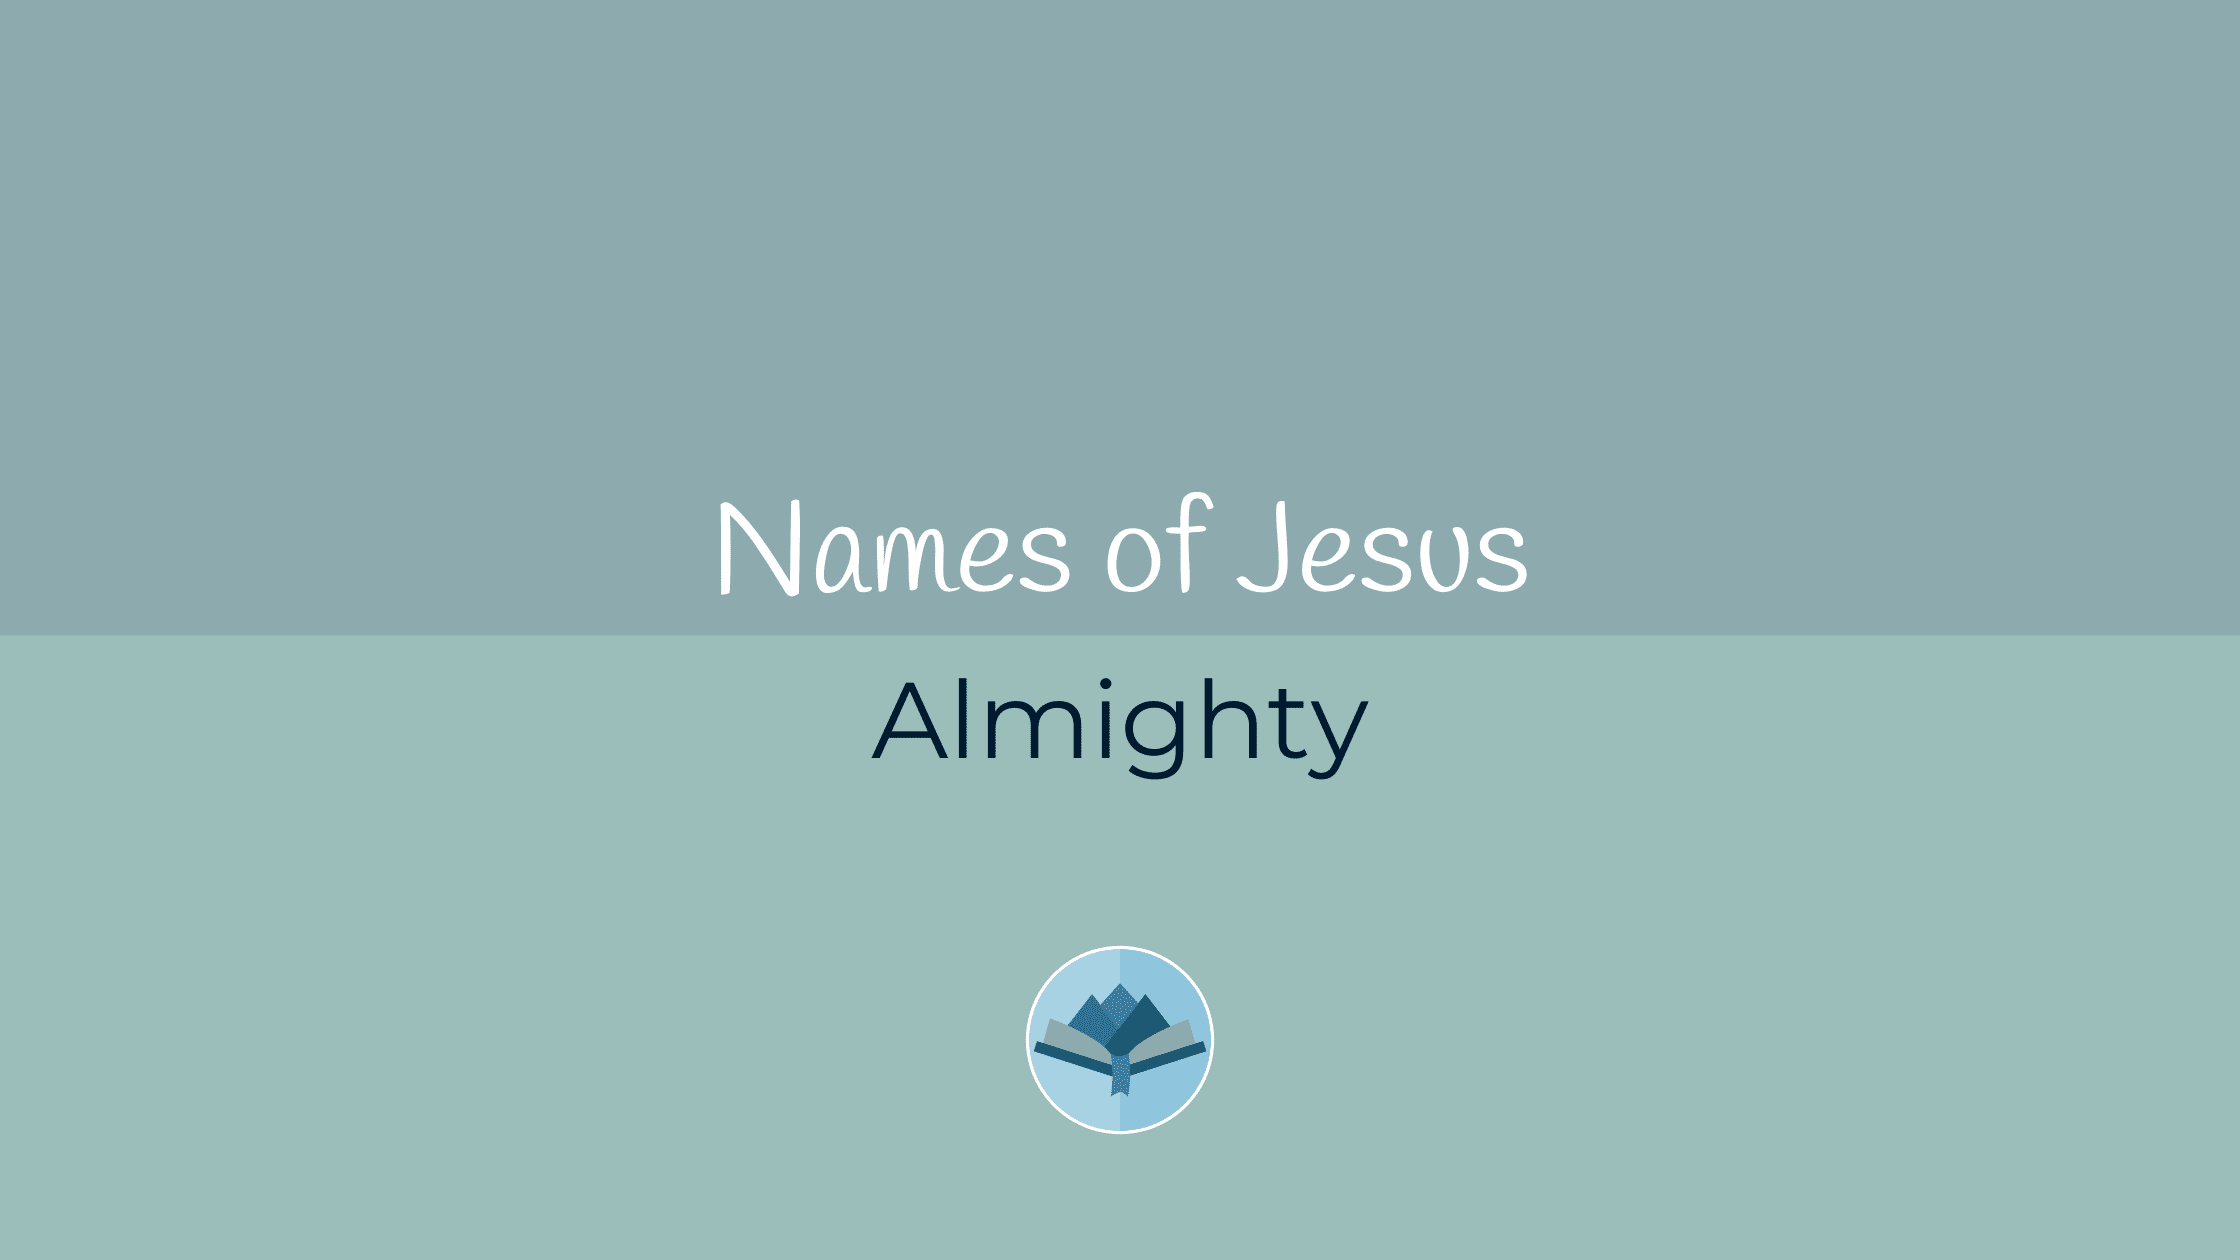 Names of Jesus Almighty